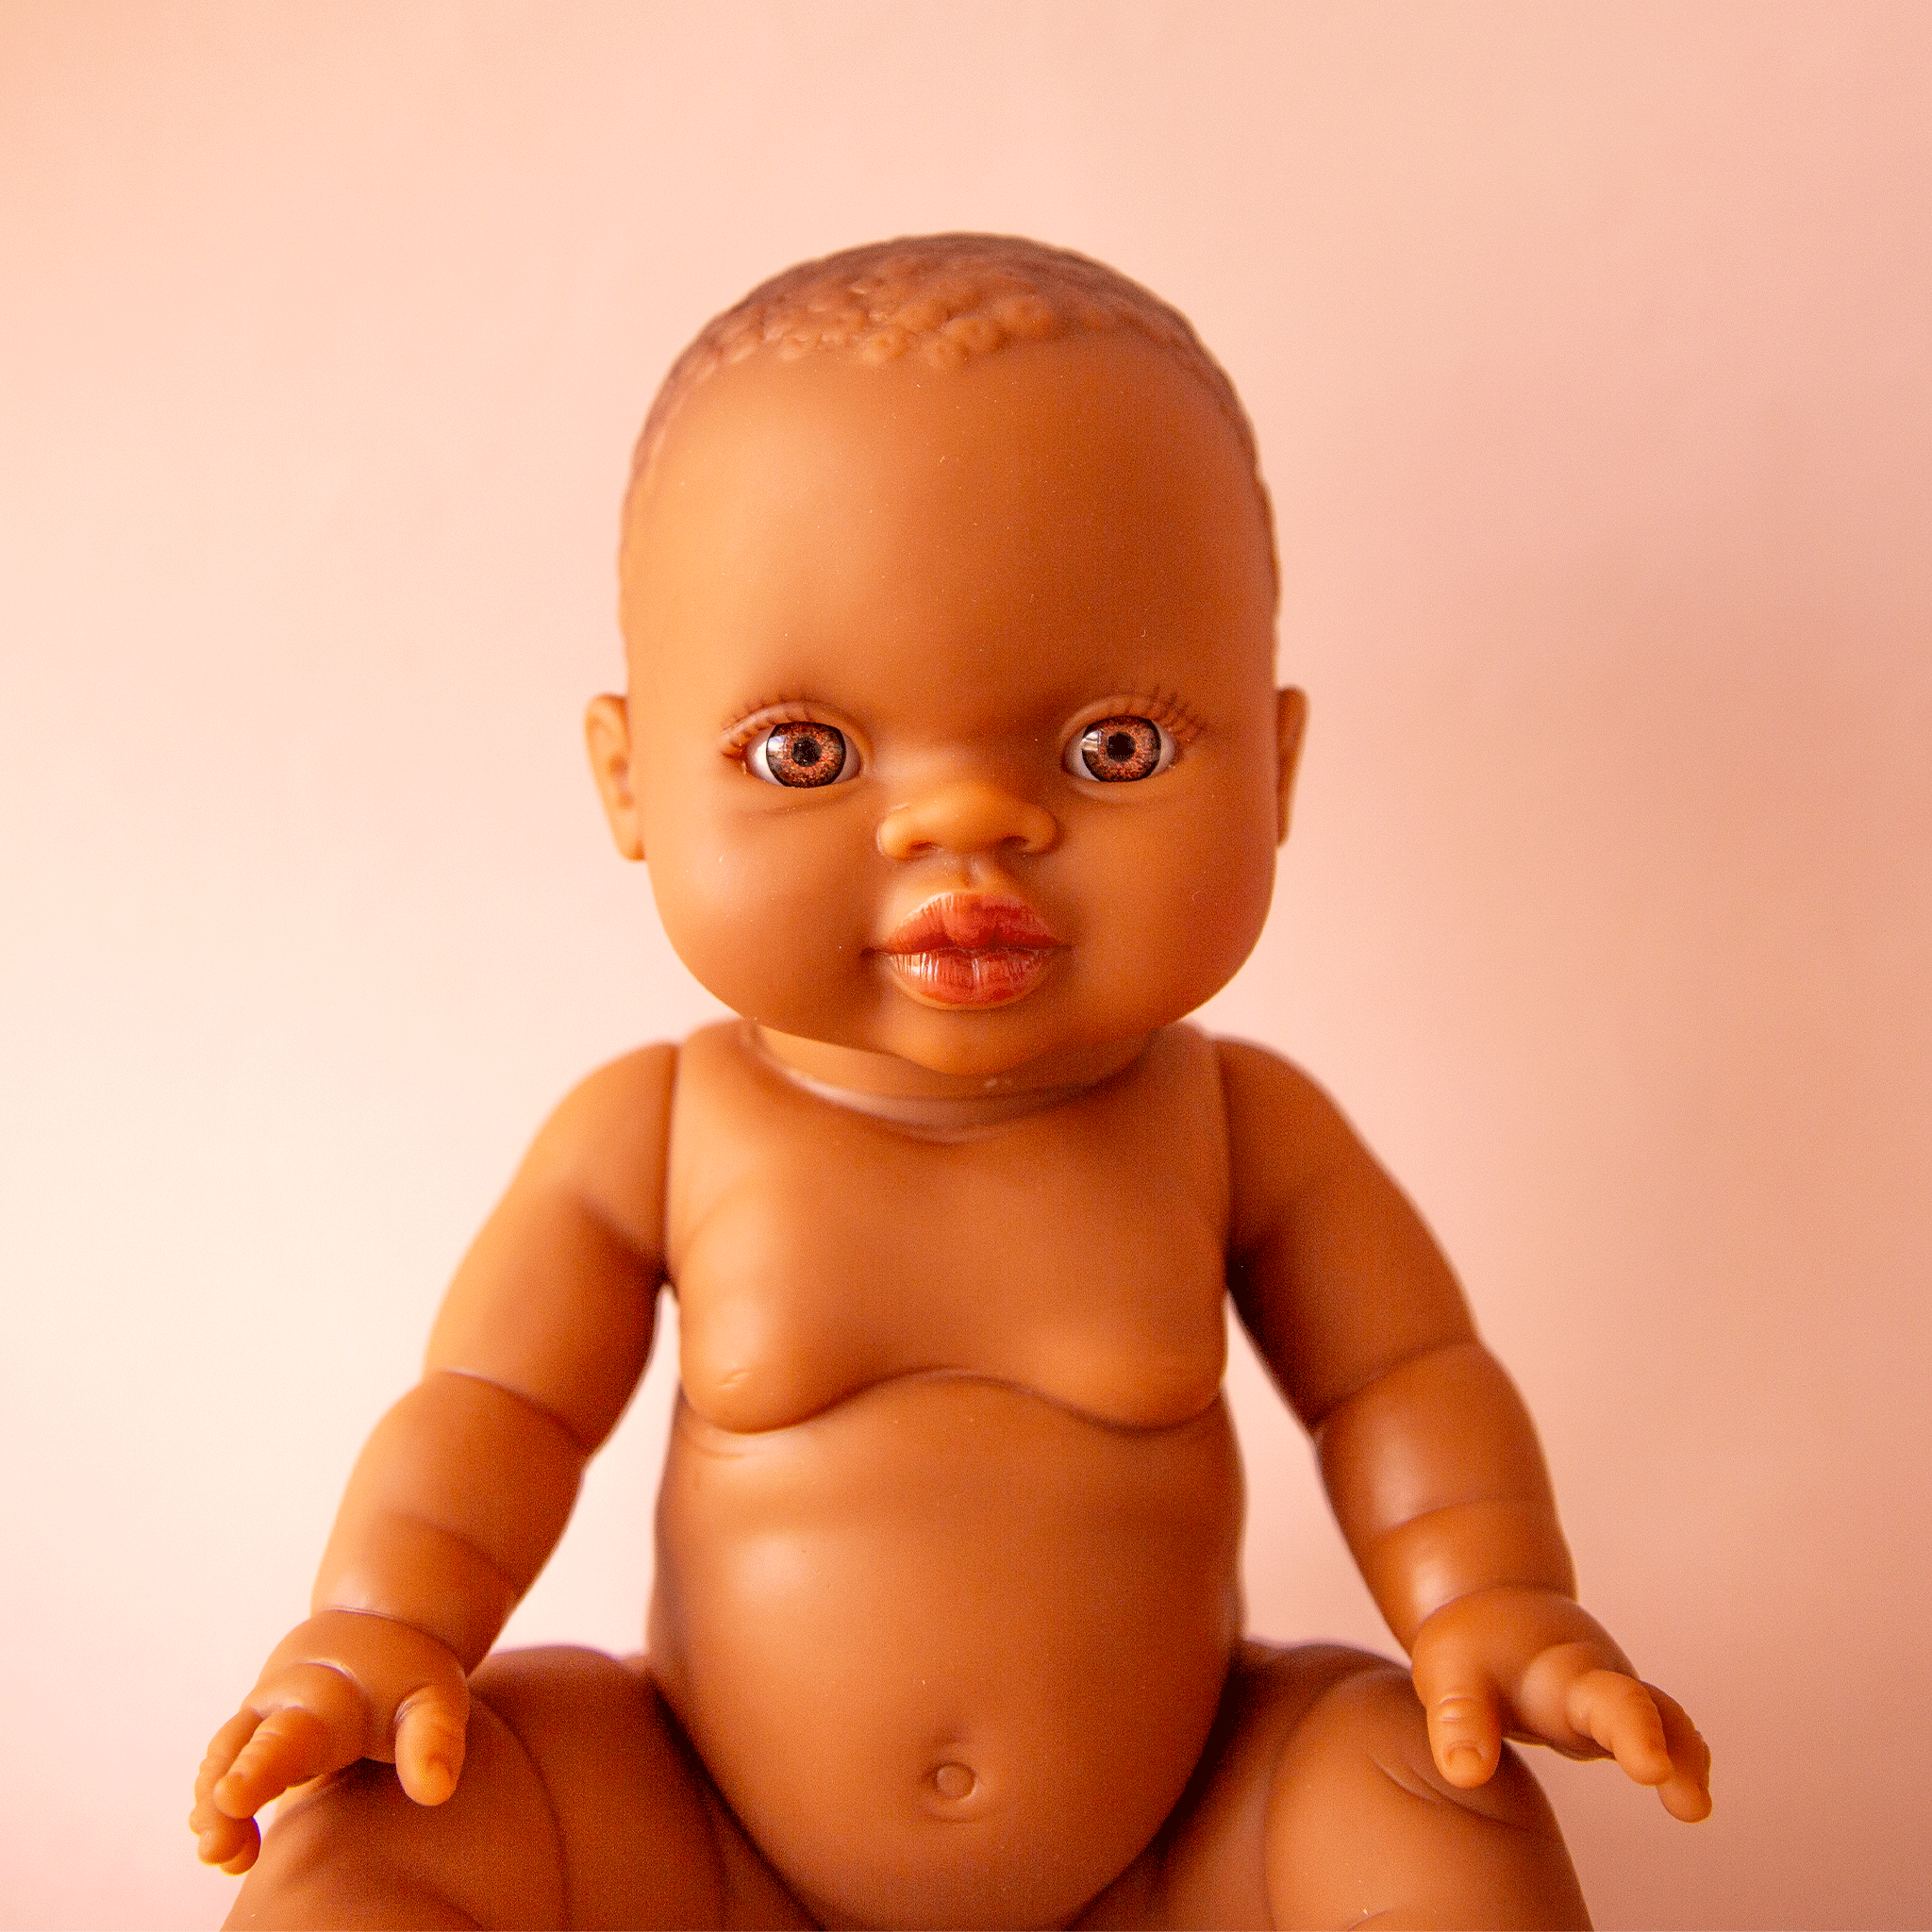 An African American baby girl doll photographed in front of a cream background.